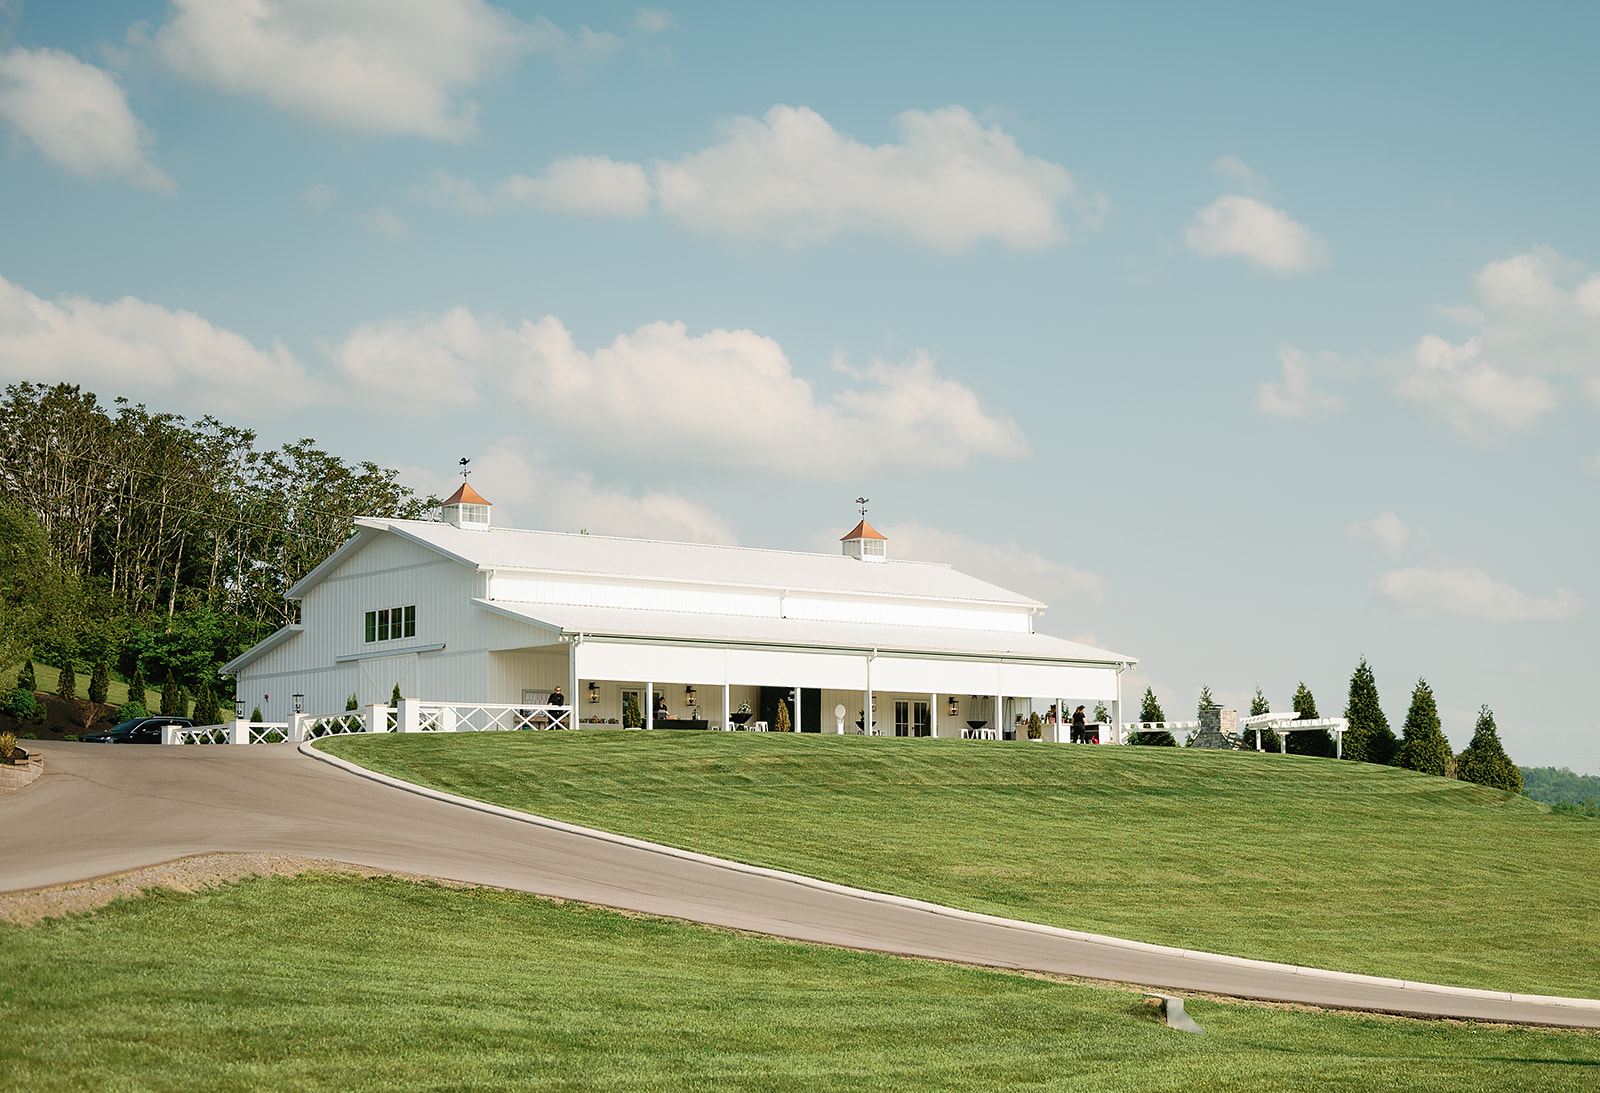 A view of the beautiful The White Dove Barn wedding venue on a grassy hill